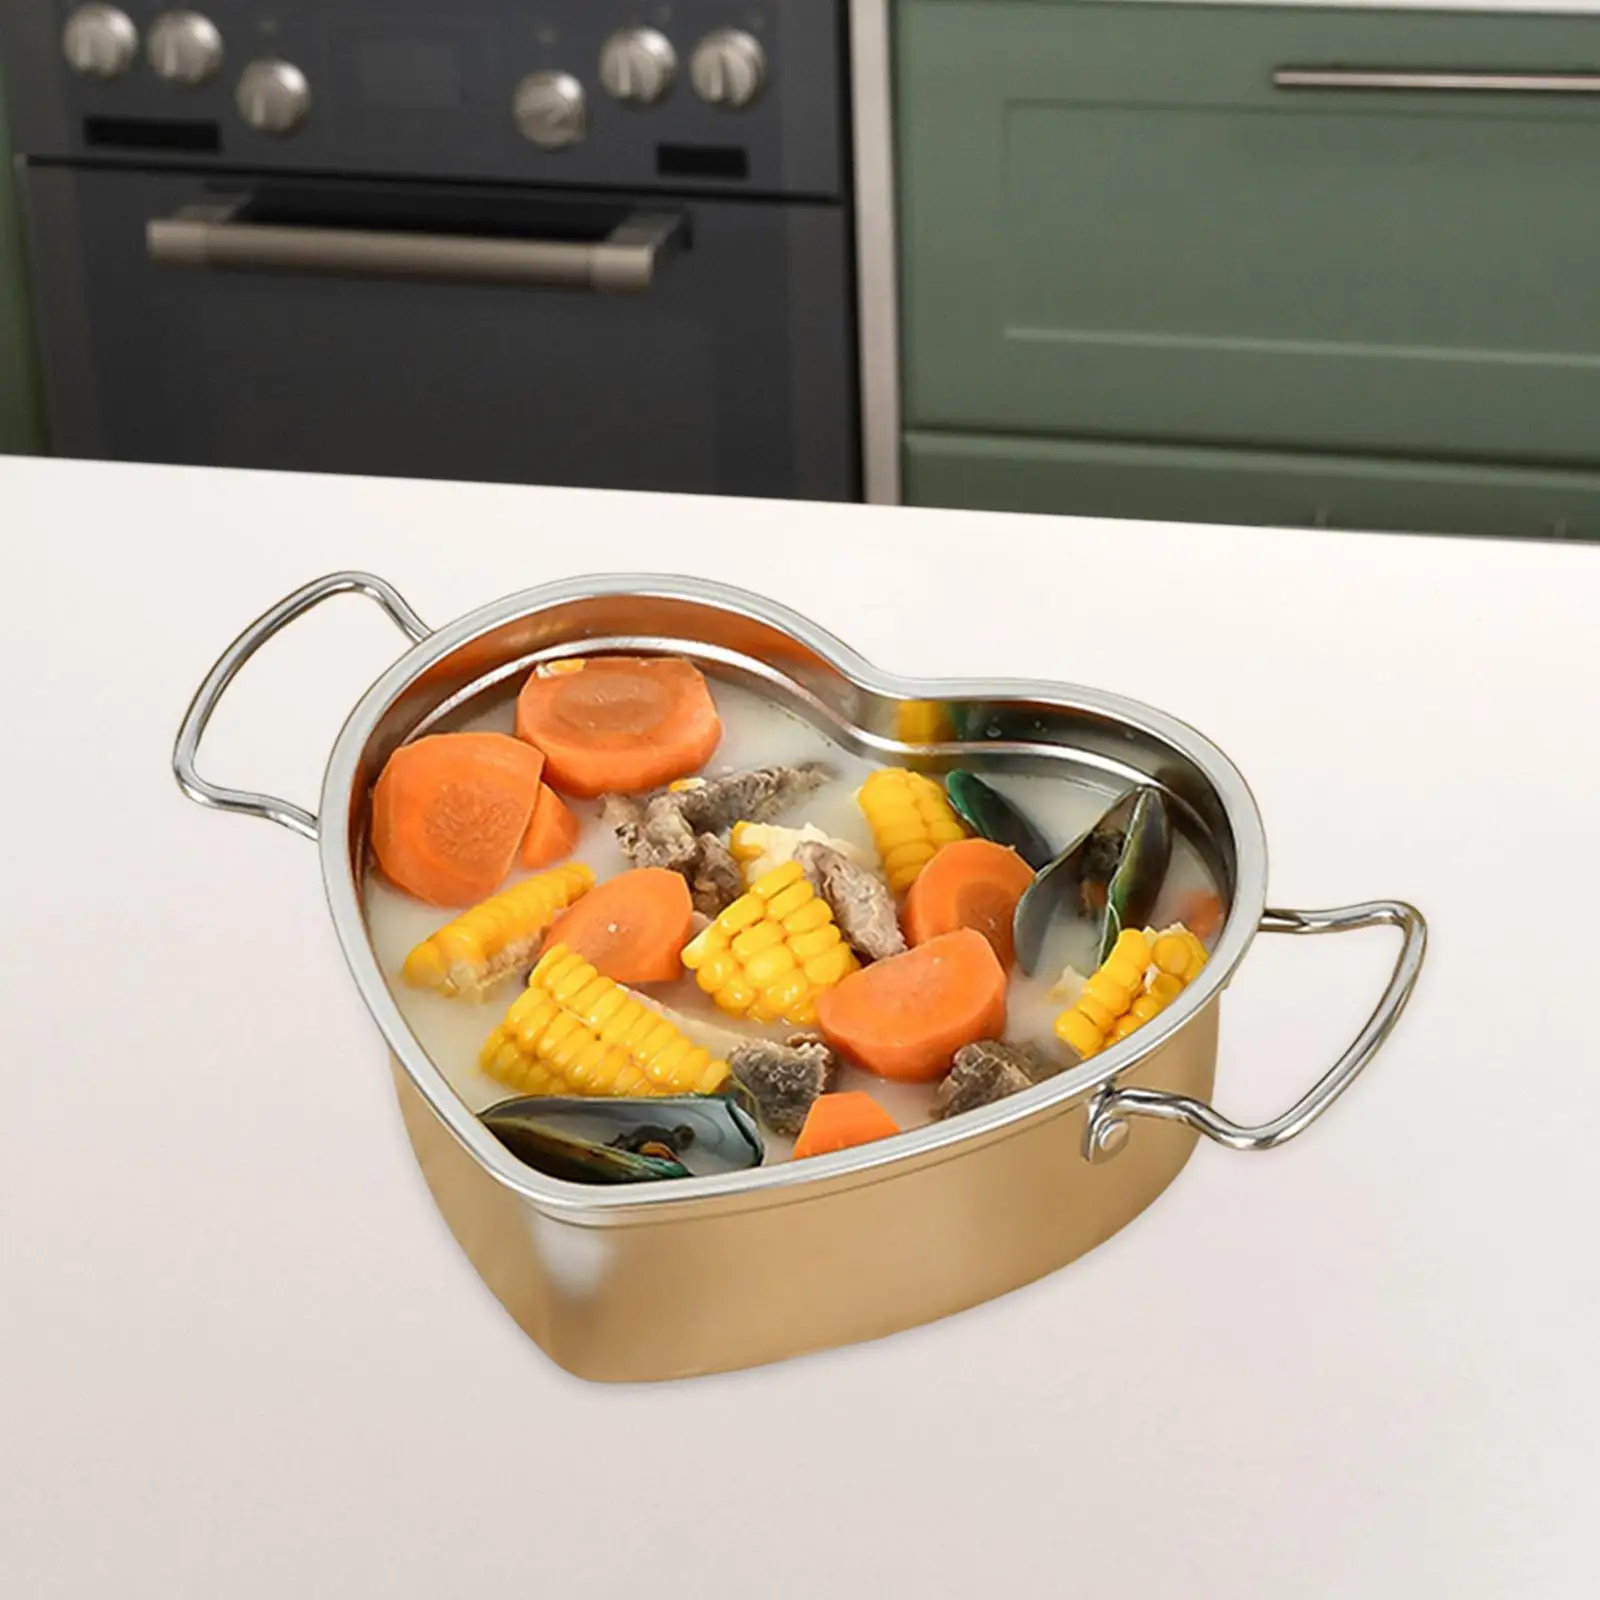 Stainless Steel Stockpot with Doubles Handle Milk Heating Pot for Home